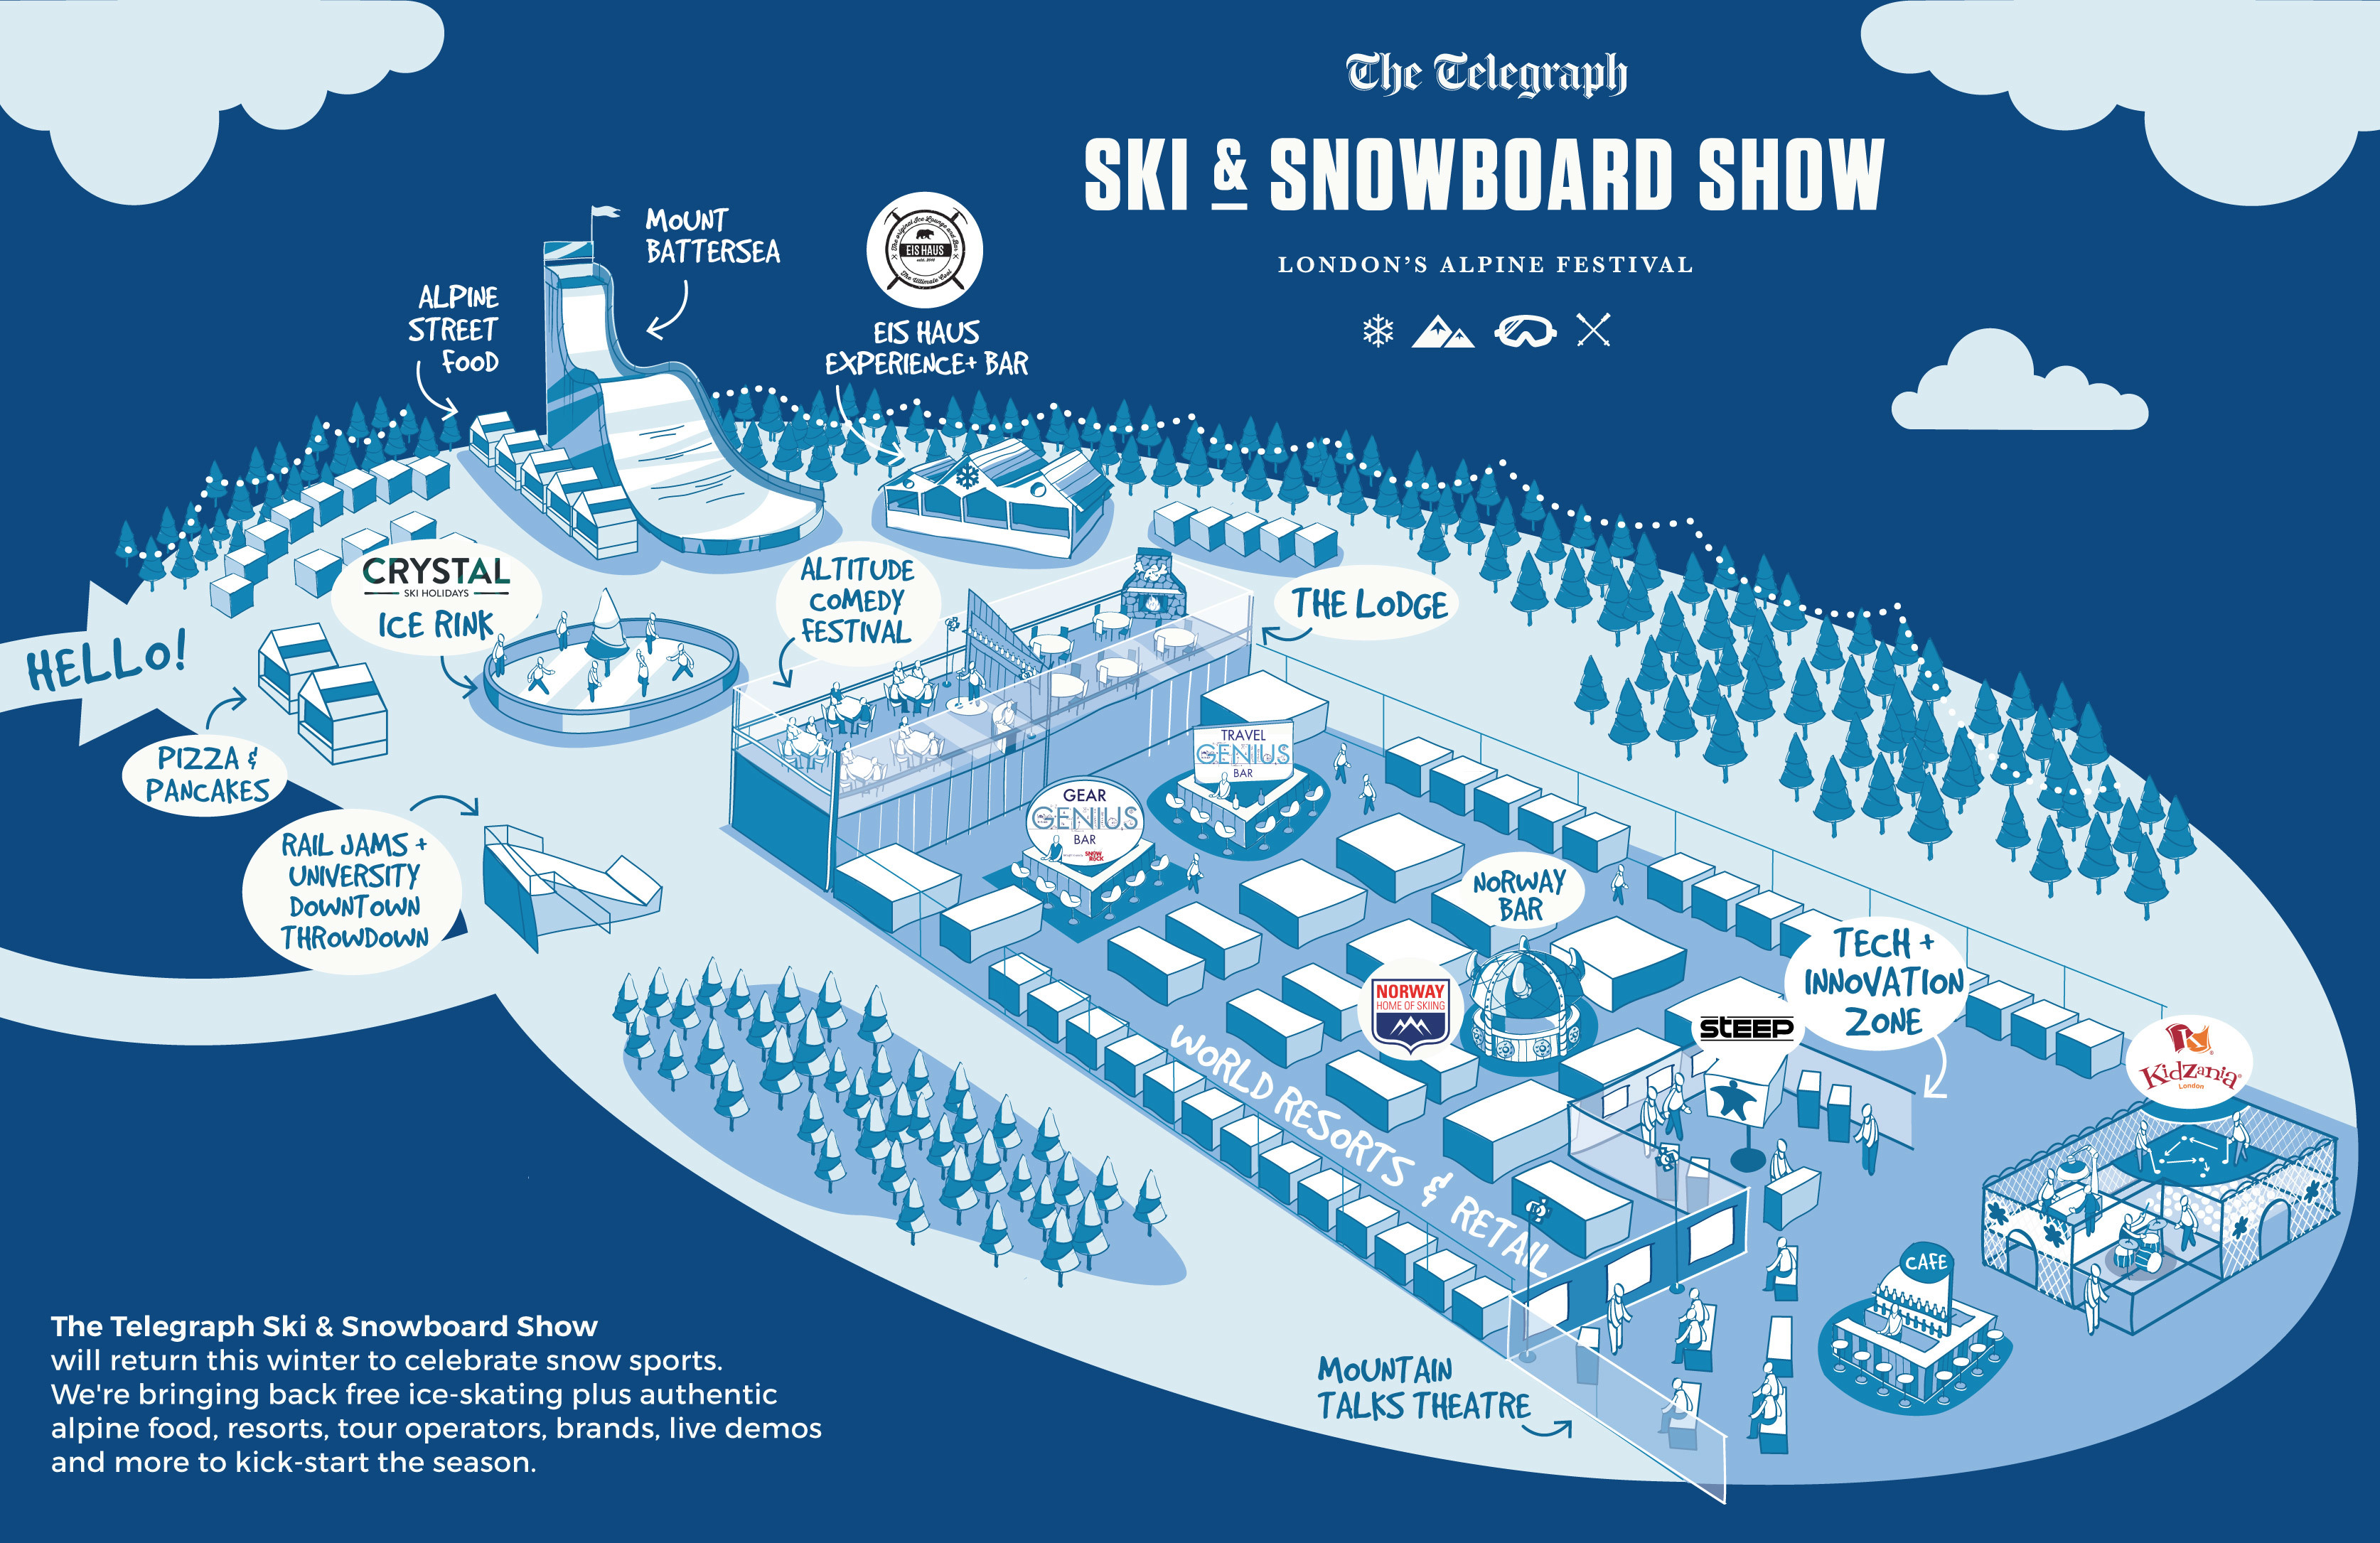 5 Reasons To Attend The London Ski And Snowboard Show 2016 regarding Ski And Snowboard Show